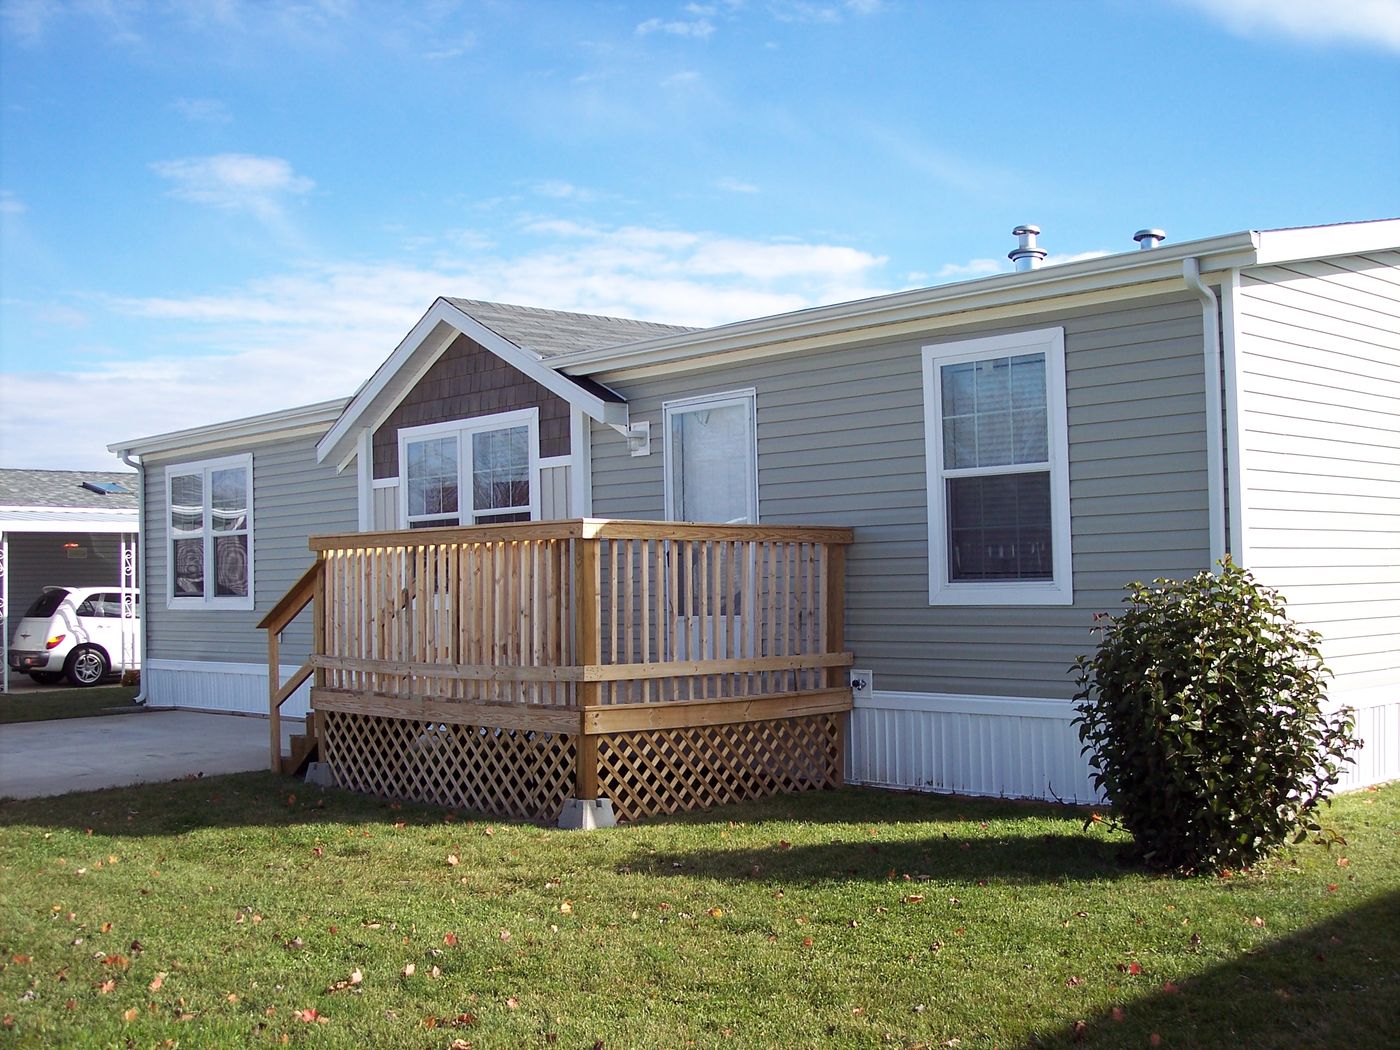 The SPRING MEADOW 4828-MS007 SECT Floor Plan. This Manufactured Mobile Home features 3 bedrooms and 2 baths.